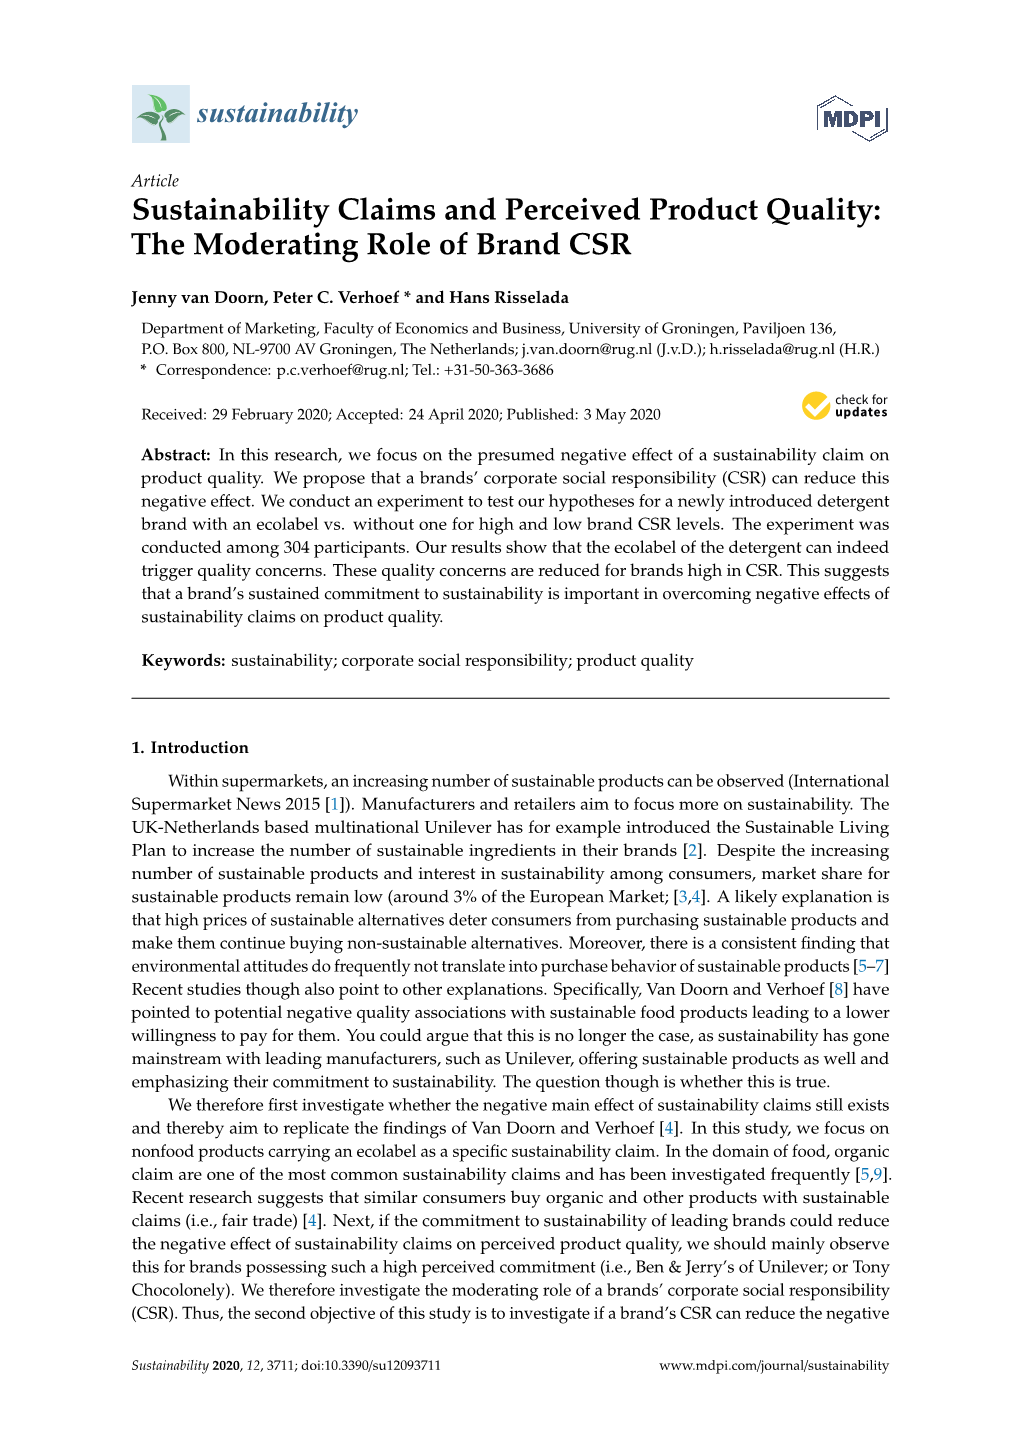 Sustainability Claims and Perceived Product Quality: the Moderating Role of Brand CSR